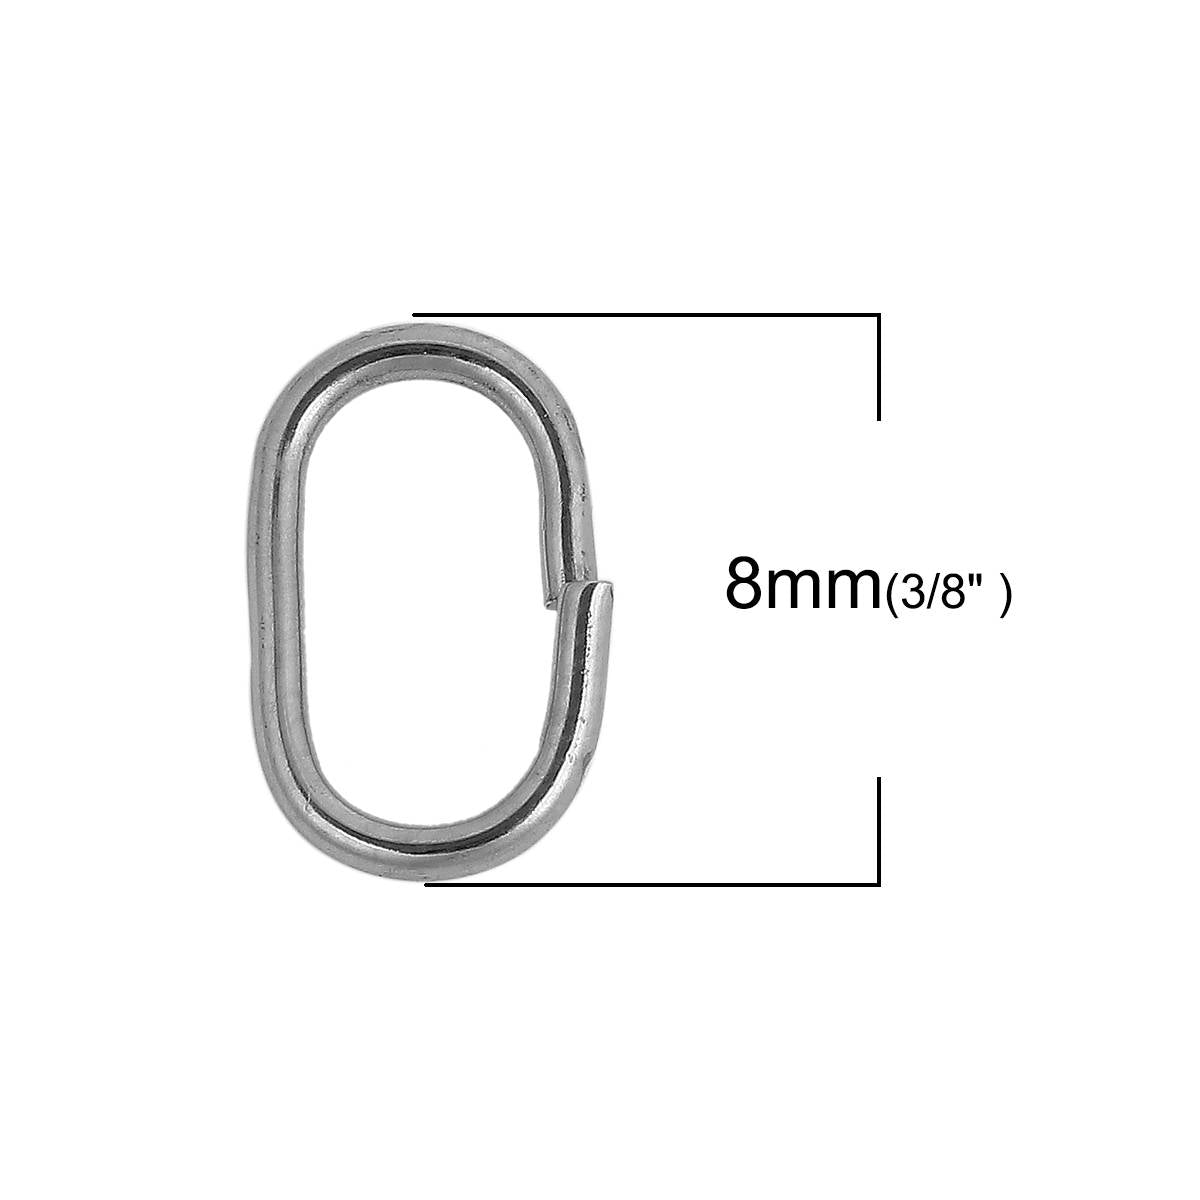 Hypoallergenic Silver Oval JumpRings 7, 8 or 10mm - 10pcs Stainless Steel Opened Jump Rings